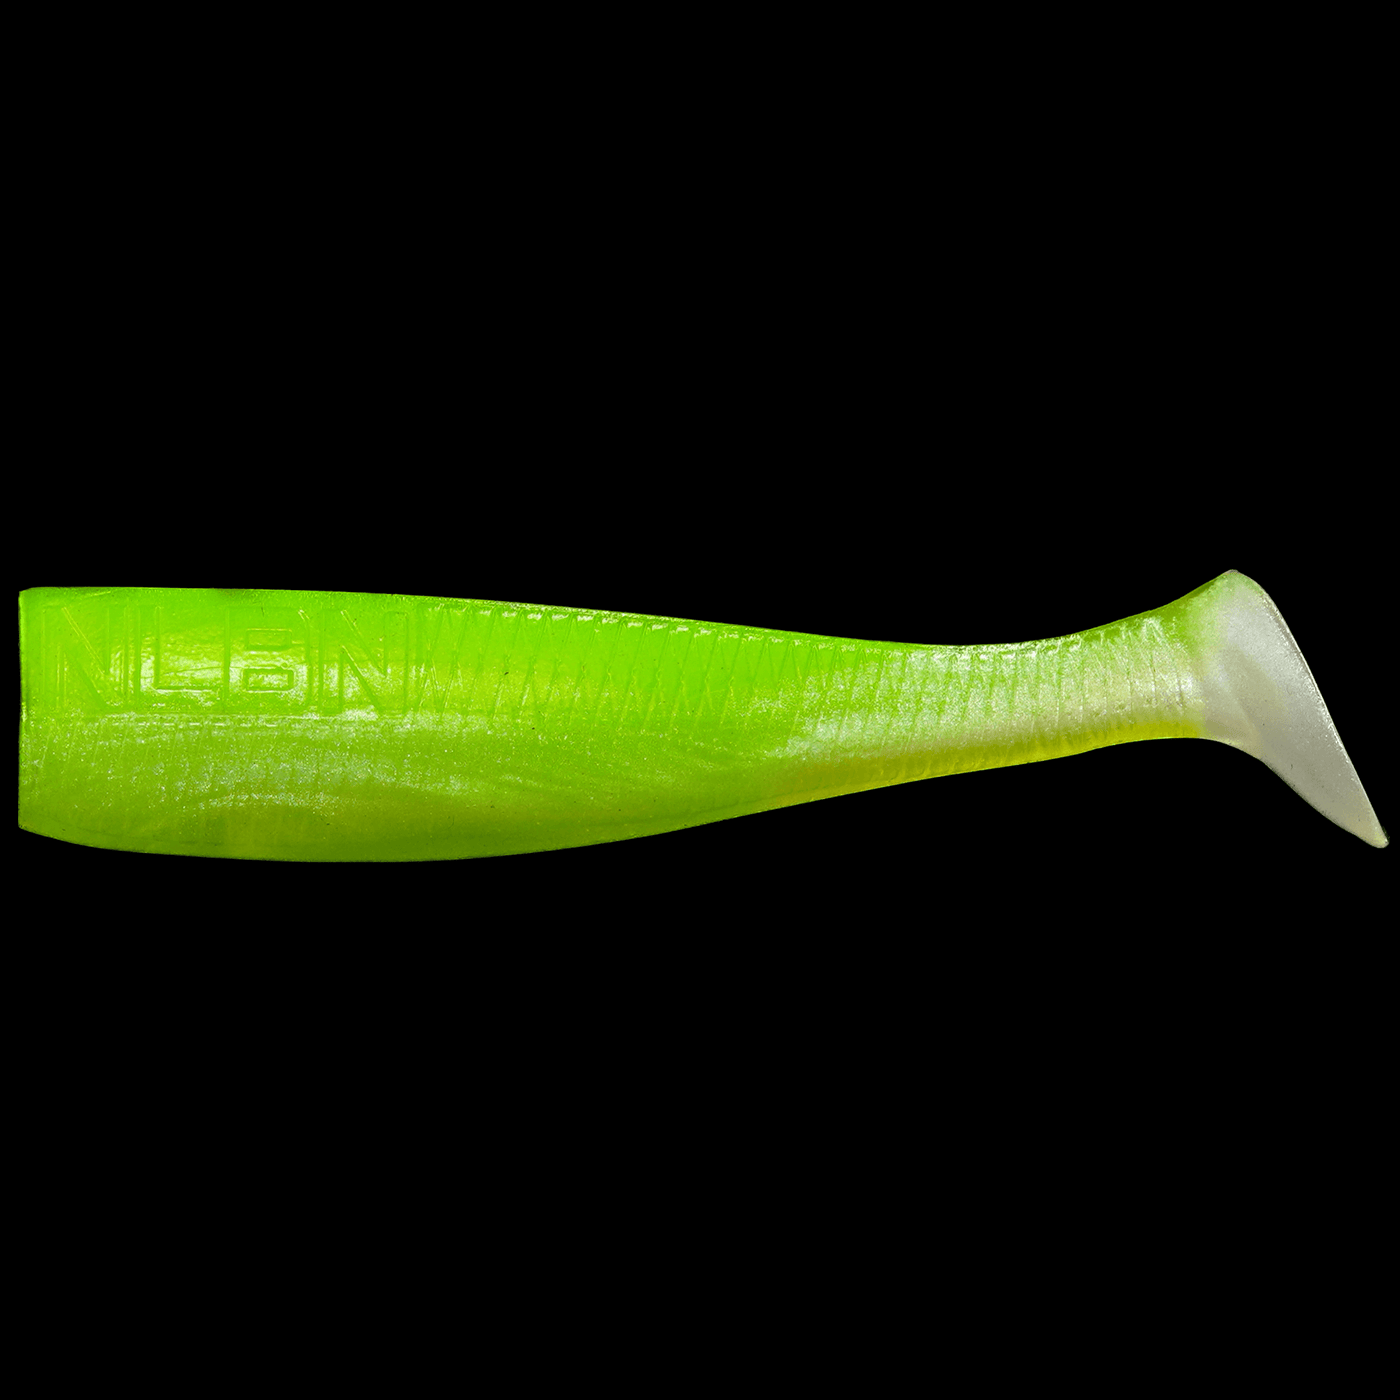 Premium fishing 5 Paddle Tail - No Live Bait Needed $9.99